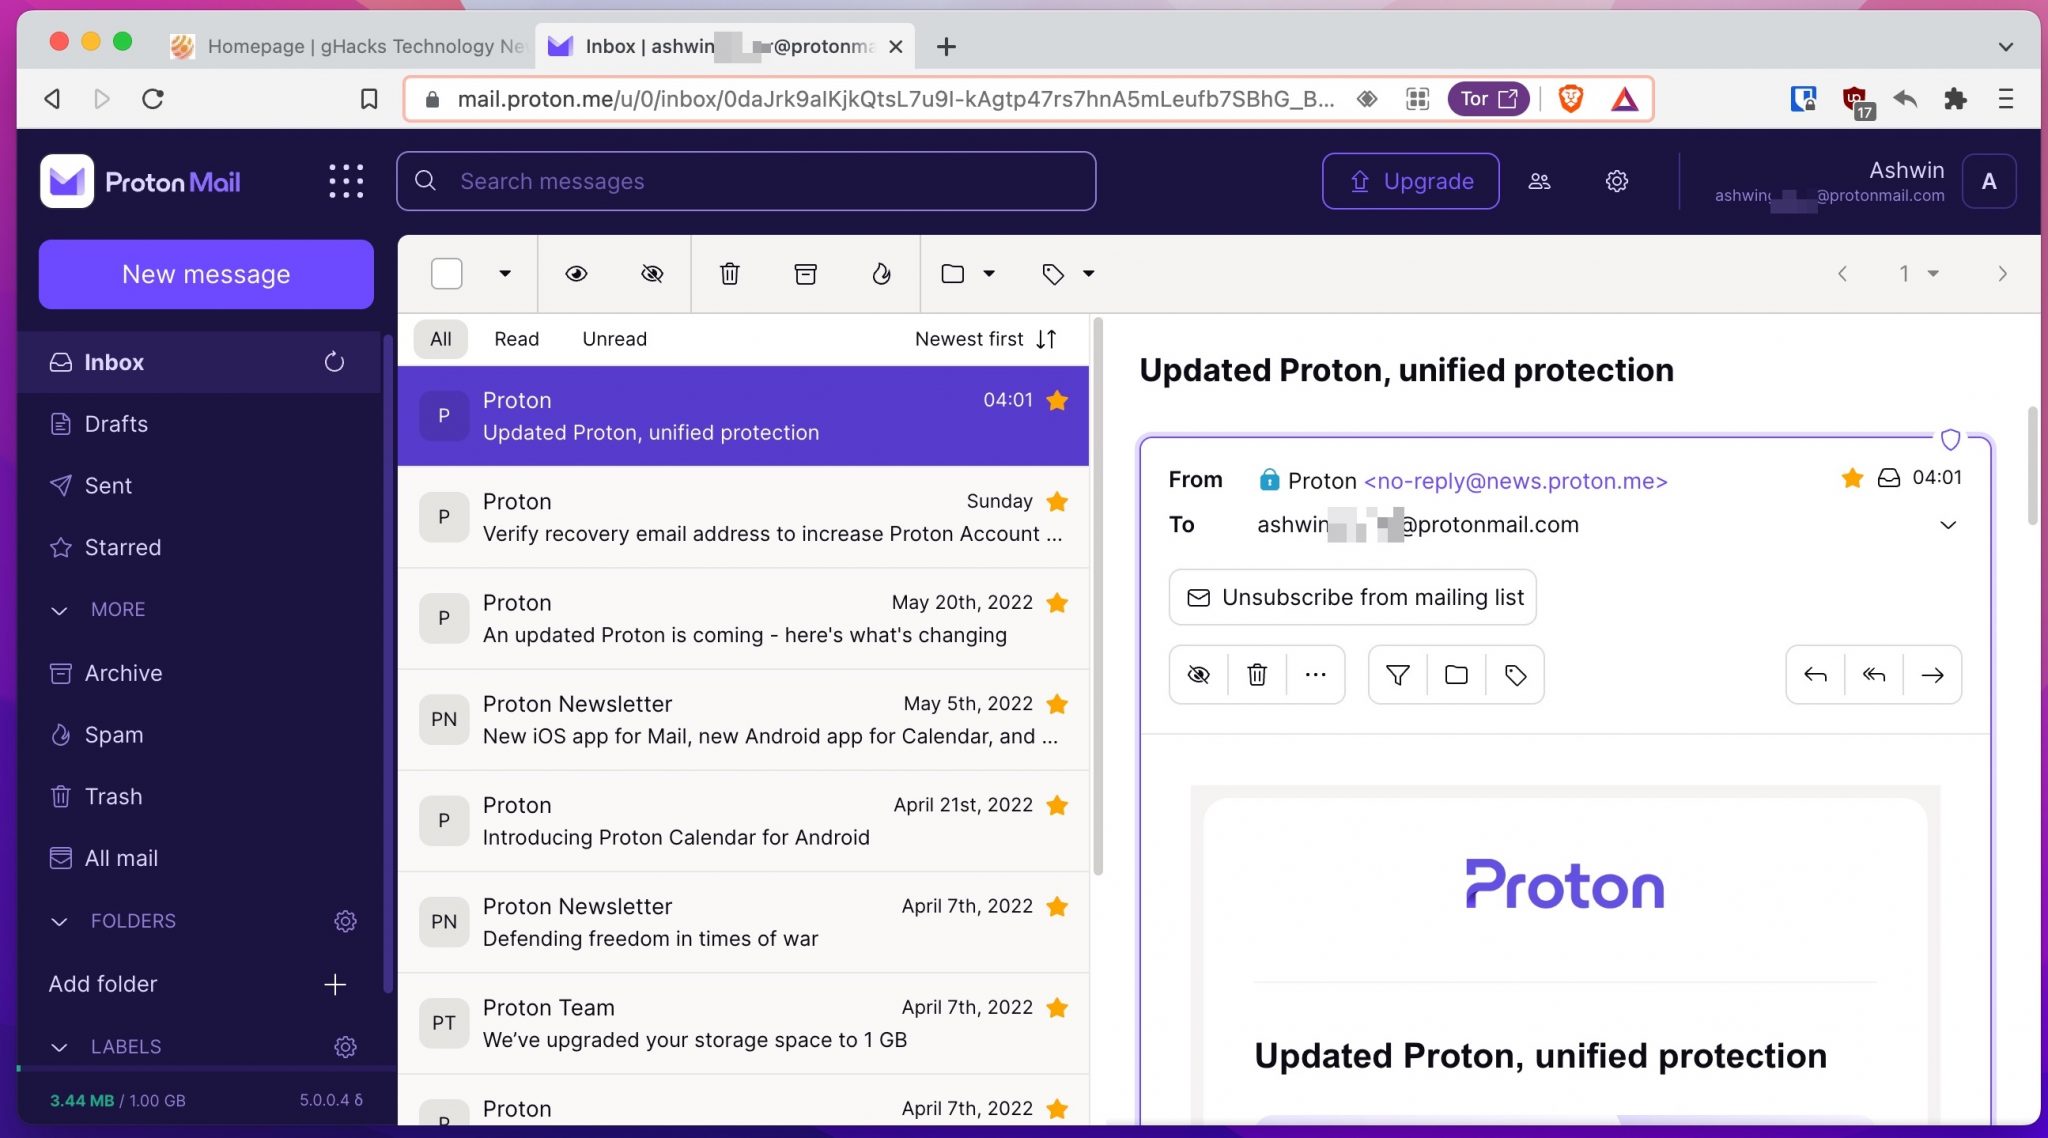 Proton has updated its logos and plan prices for Mail and VPN  gHacks